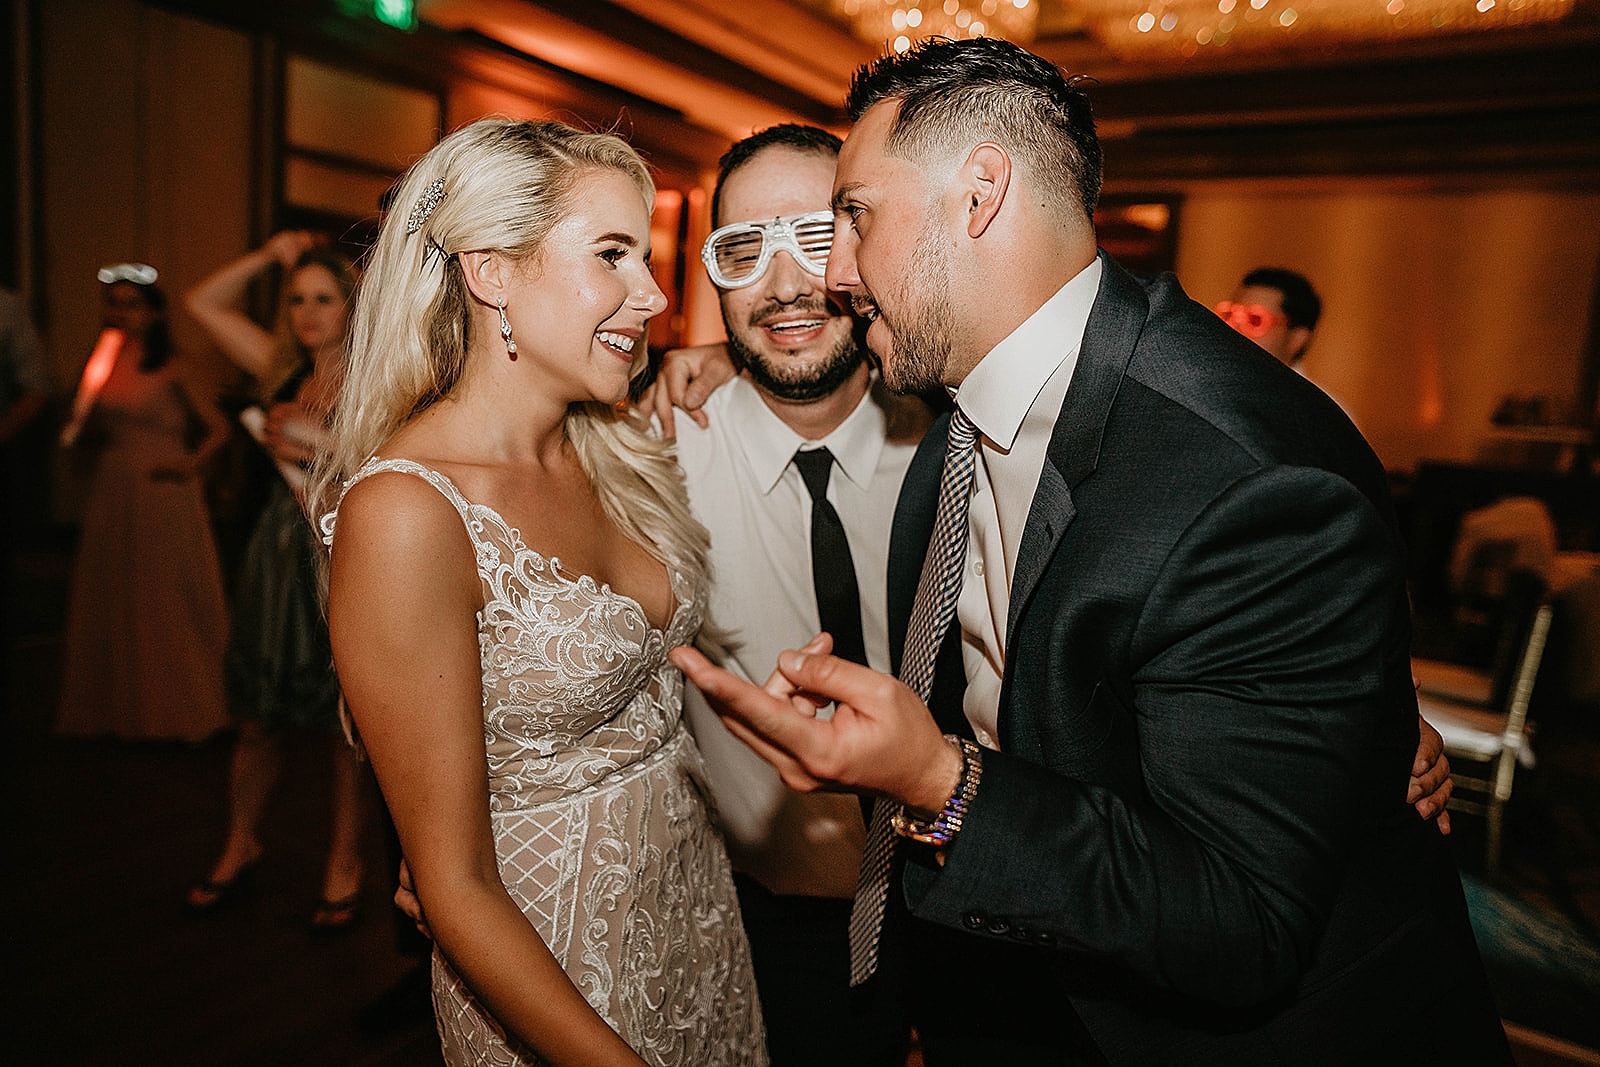 Doubletree by Hilton in Deerfield Wedding captured by South Florida Wedding Photographer, Krystal Capone Photography